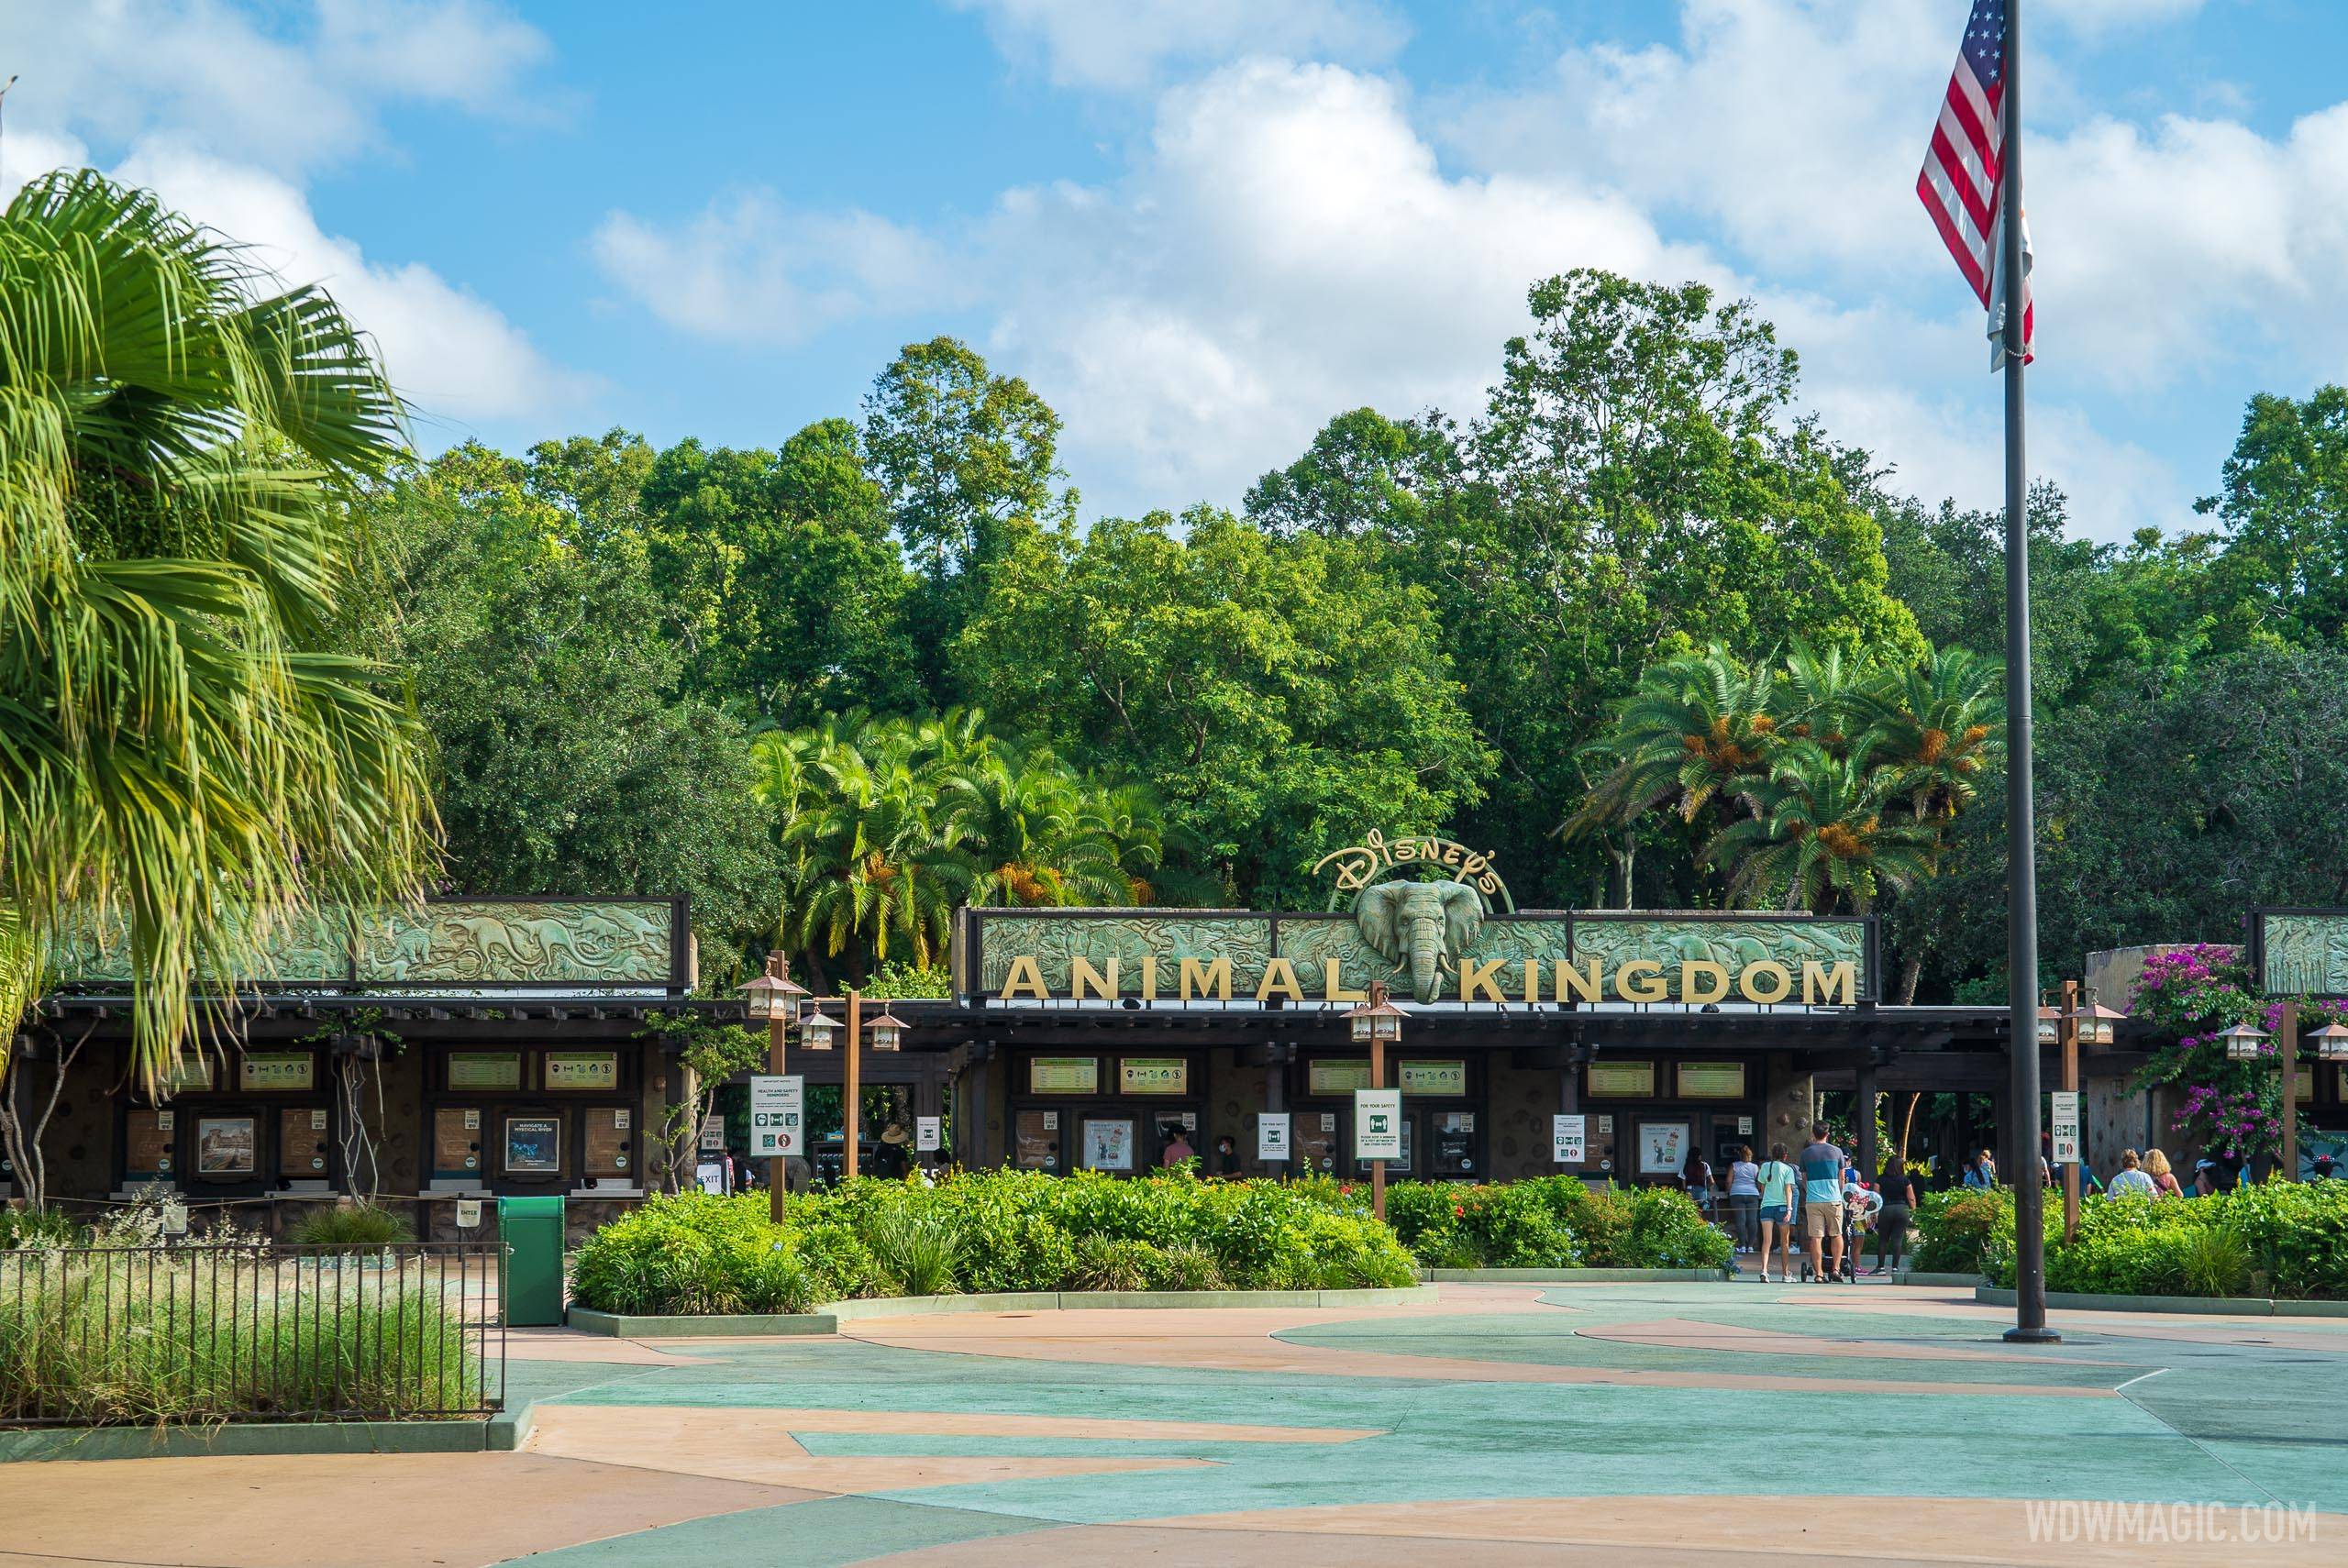 Disney's Animal Kingdom now has earlier openings and later closings during February